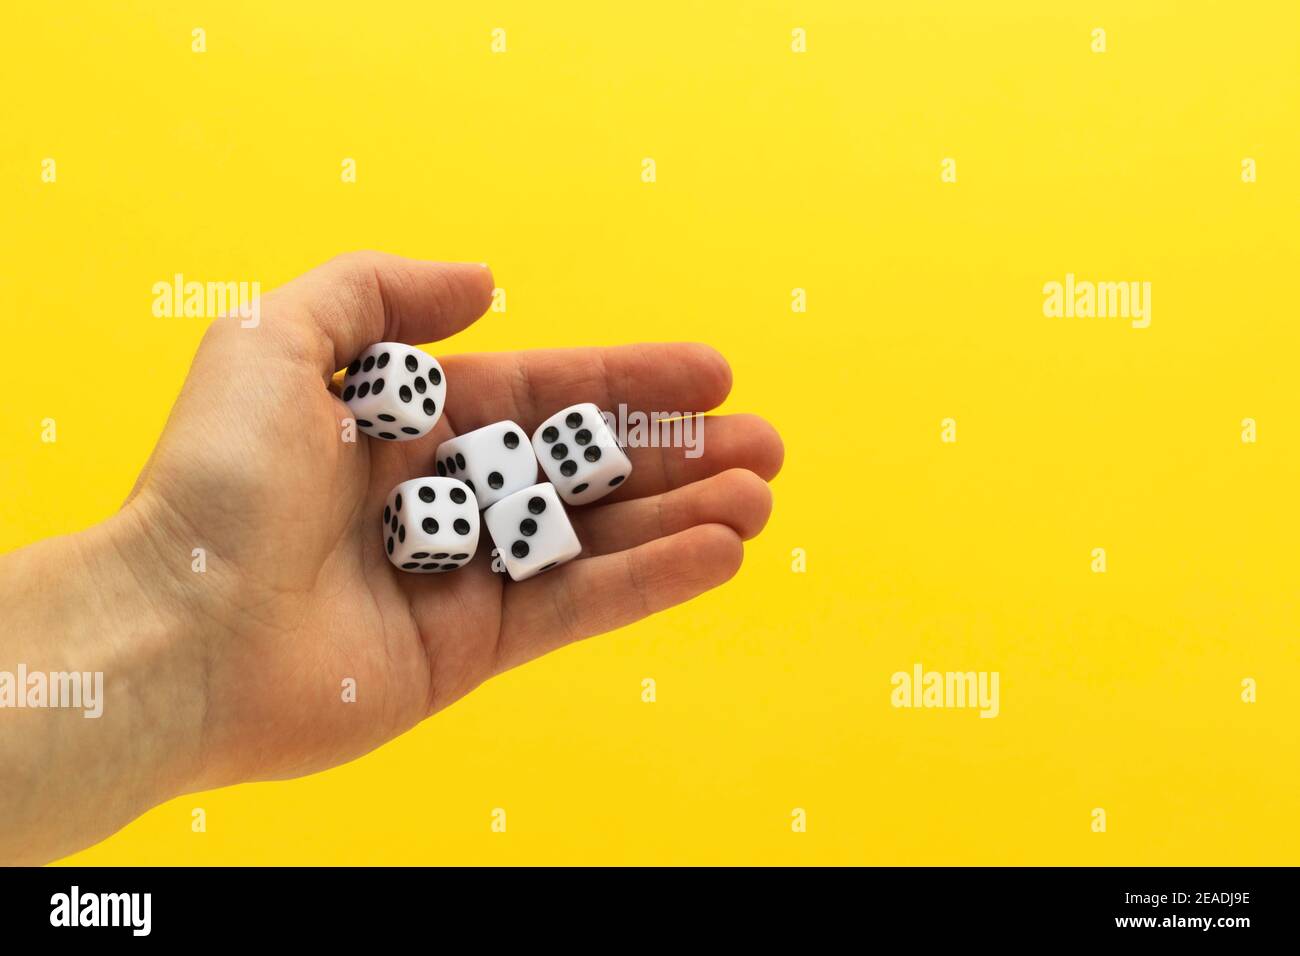 Woman hand holding five dice. Playing cube with numbers. Items for board games. Blurred yellow background. Stock Photo